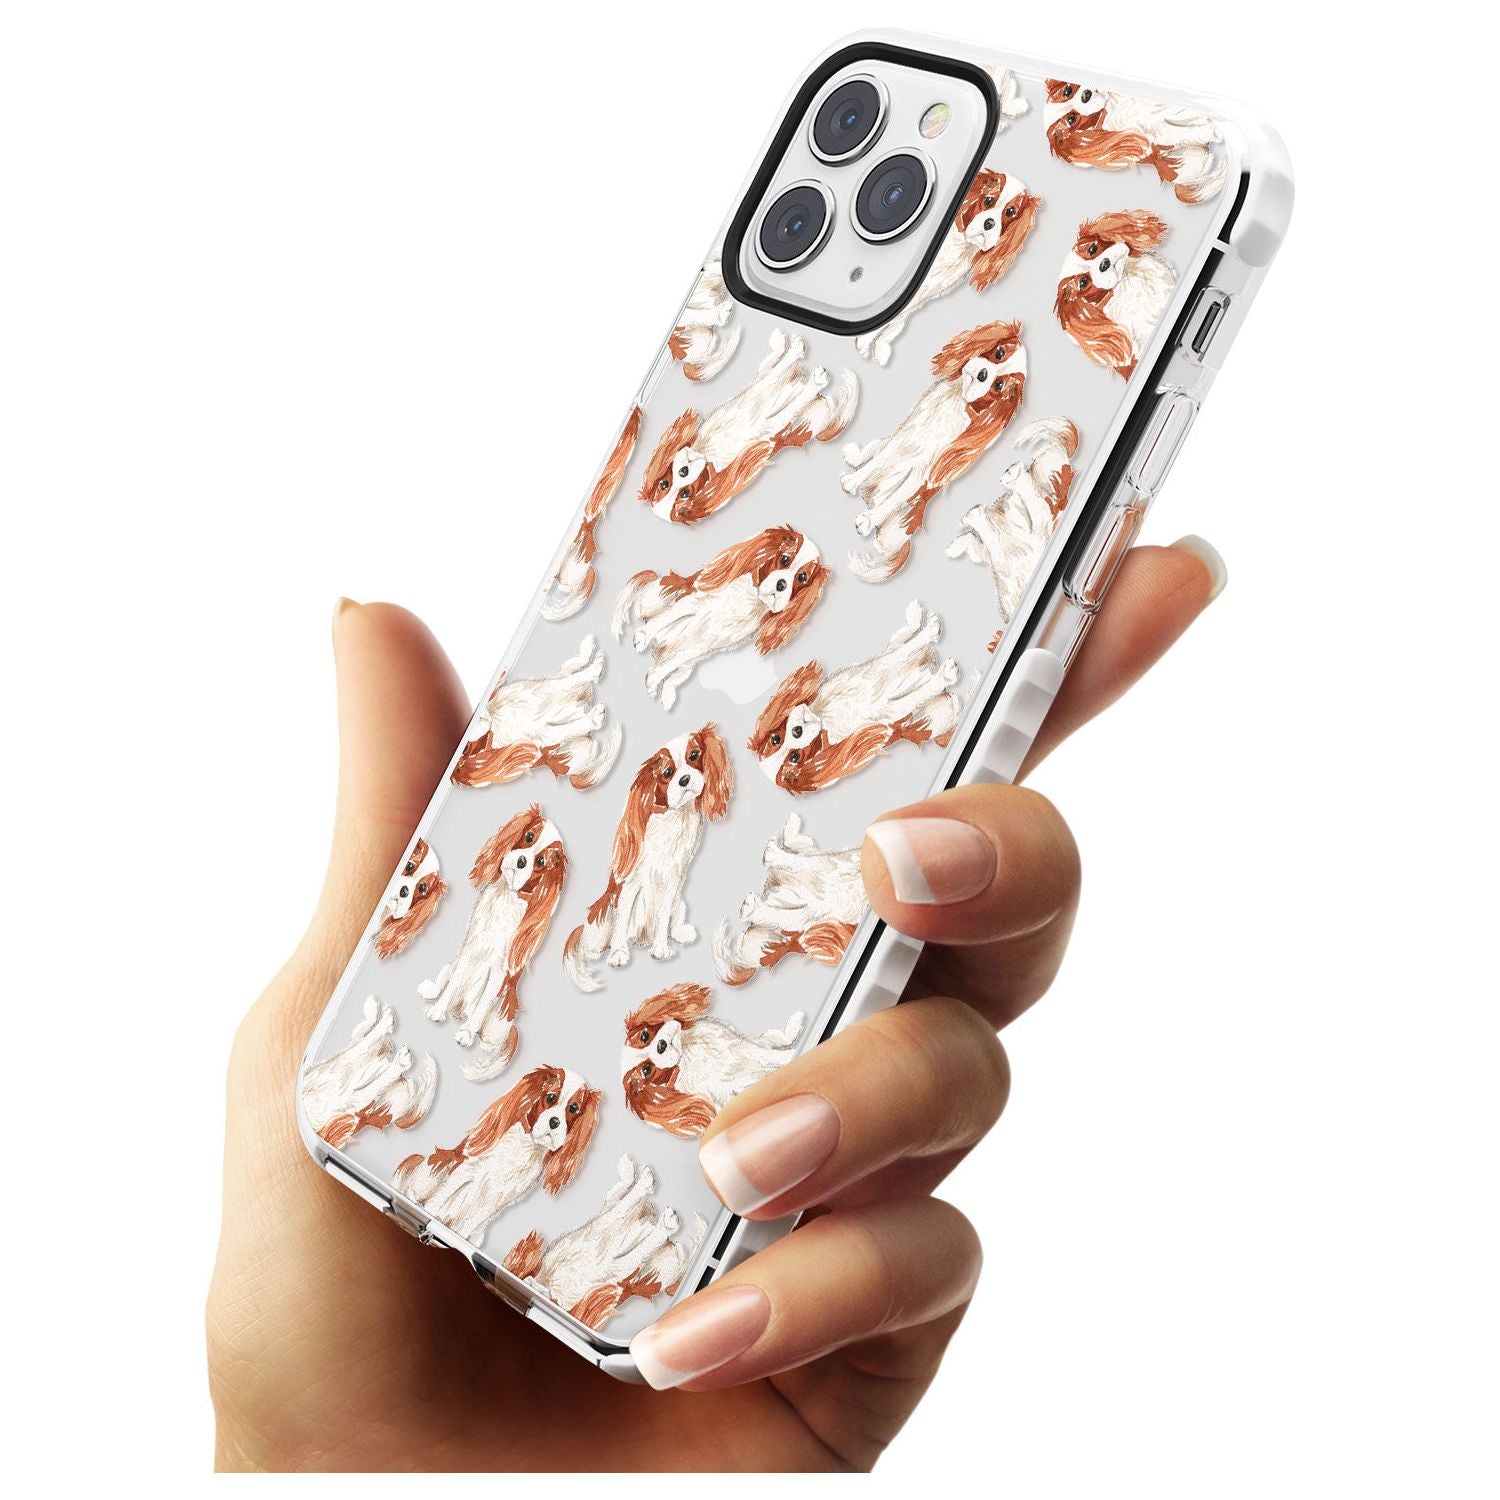 Cavalier King Charles Spaniel Dog Pattern Impact Phone Case for iPhone 11 Pro Max